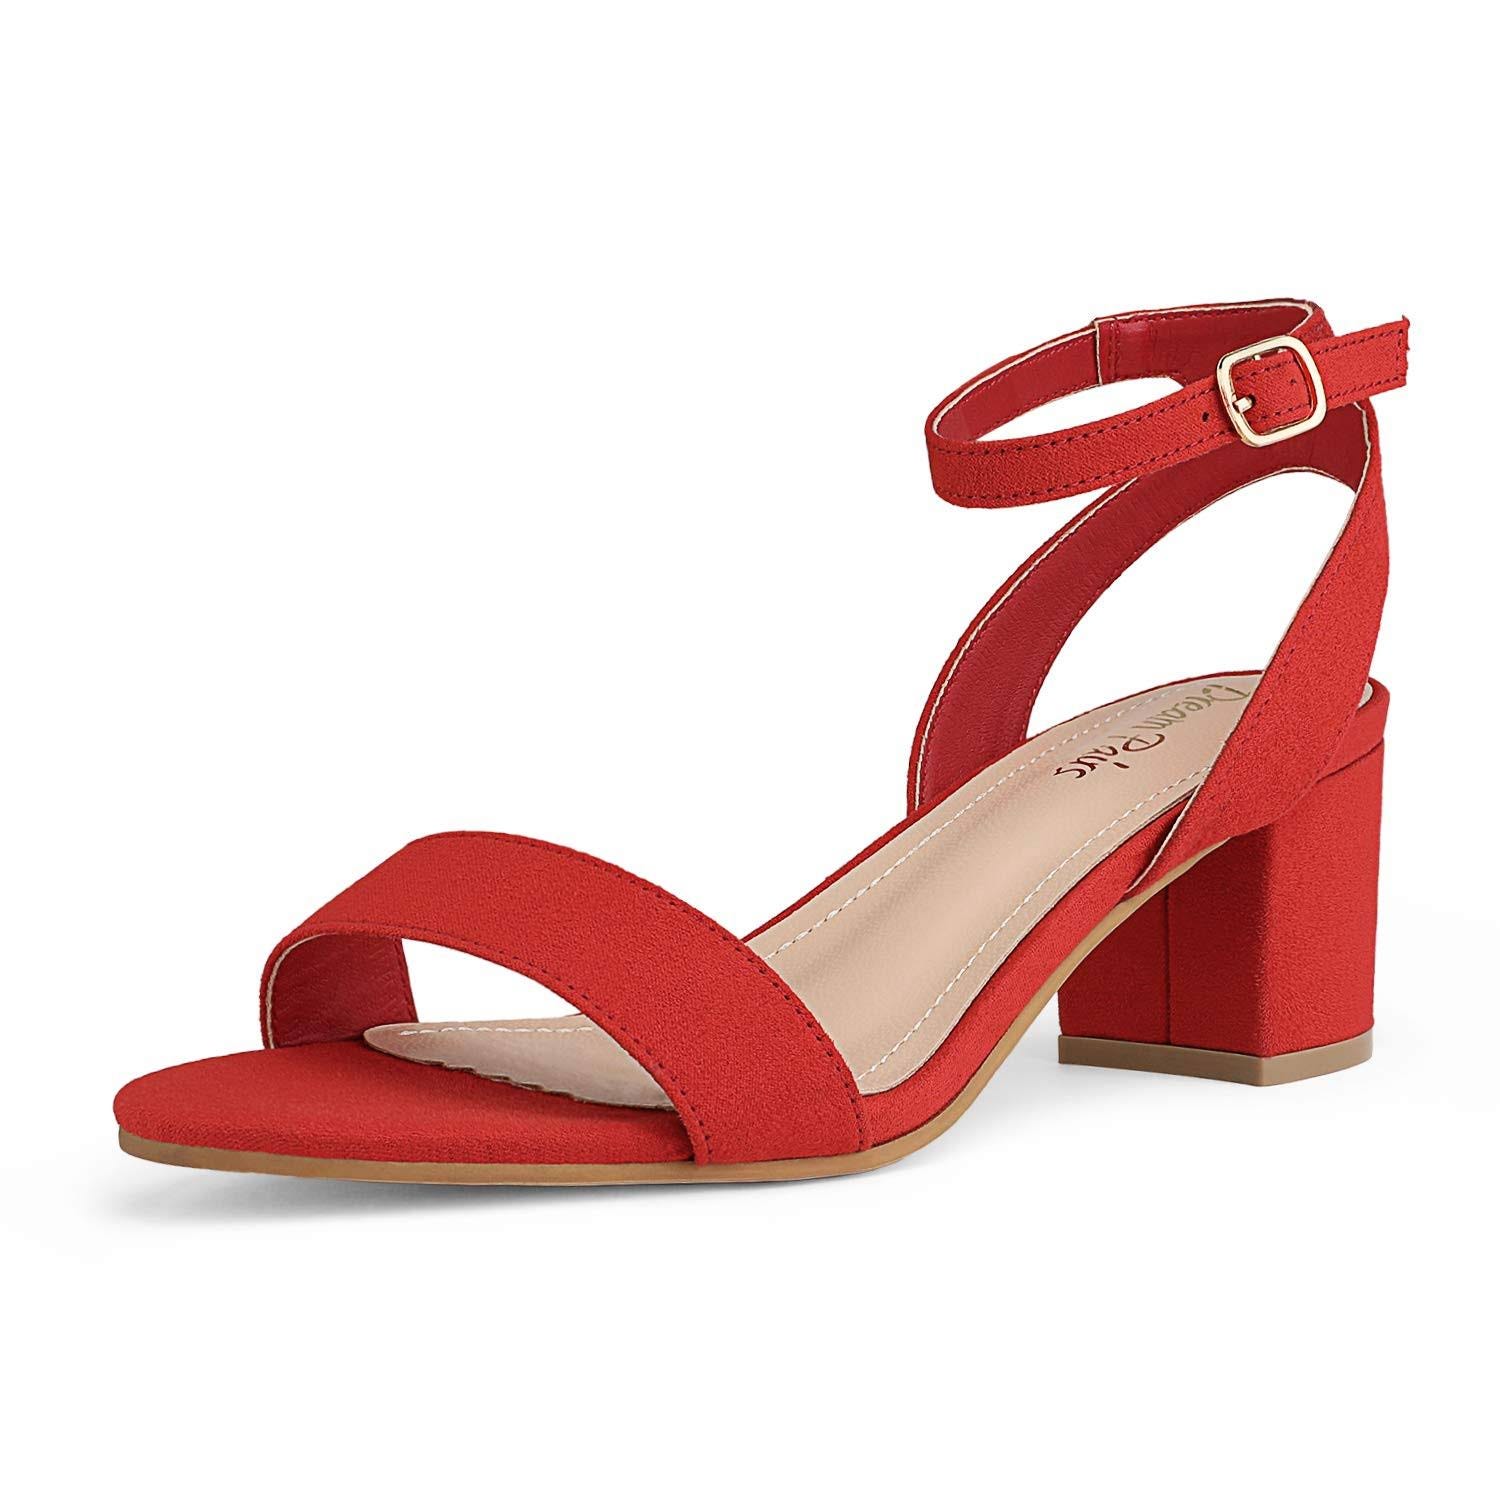 High-Quality Short Heel Women's Sandals: Chic and Comfortable | Image